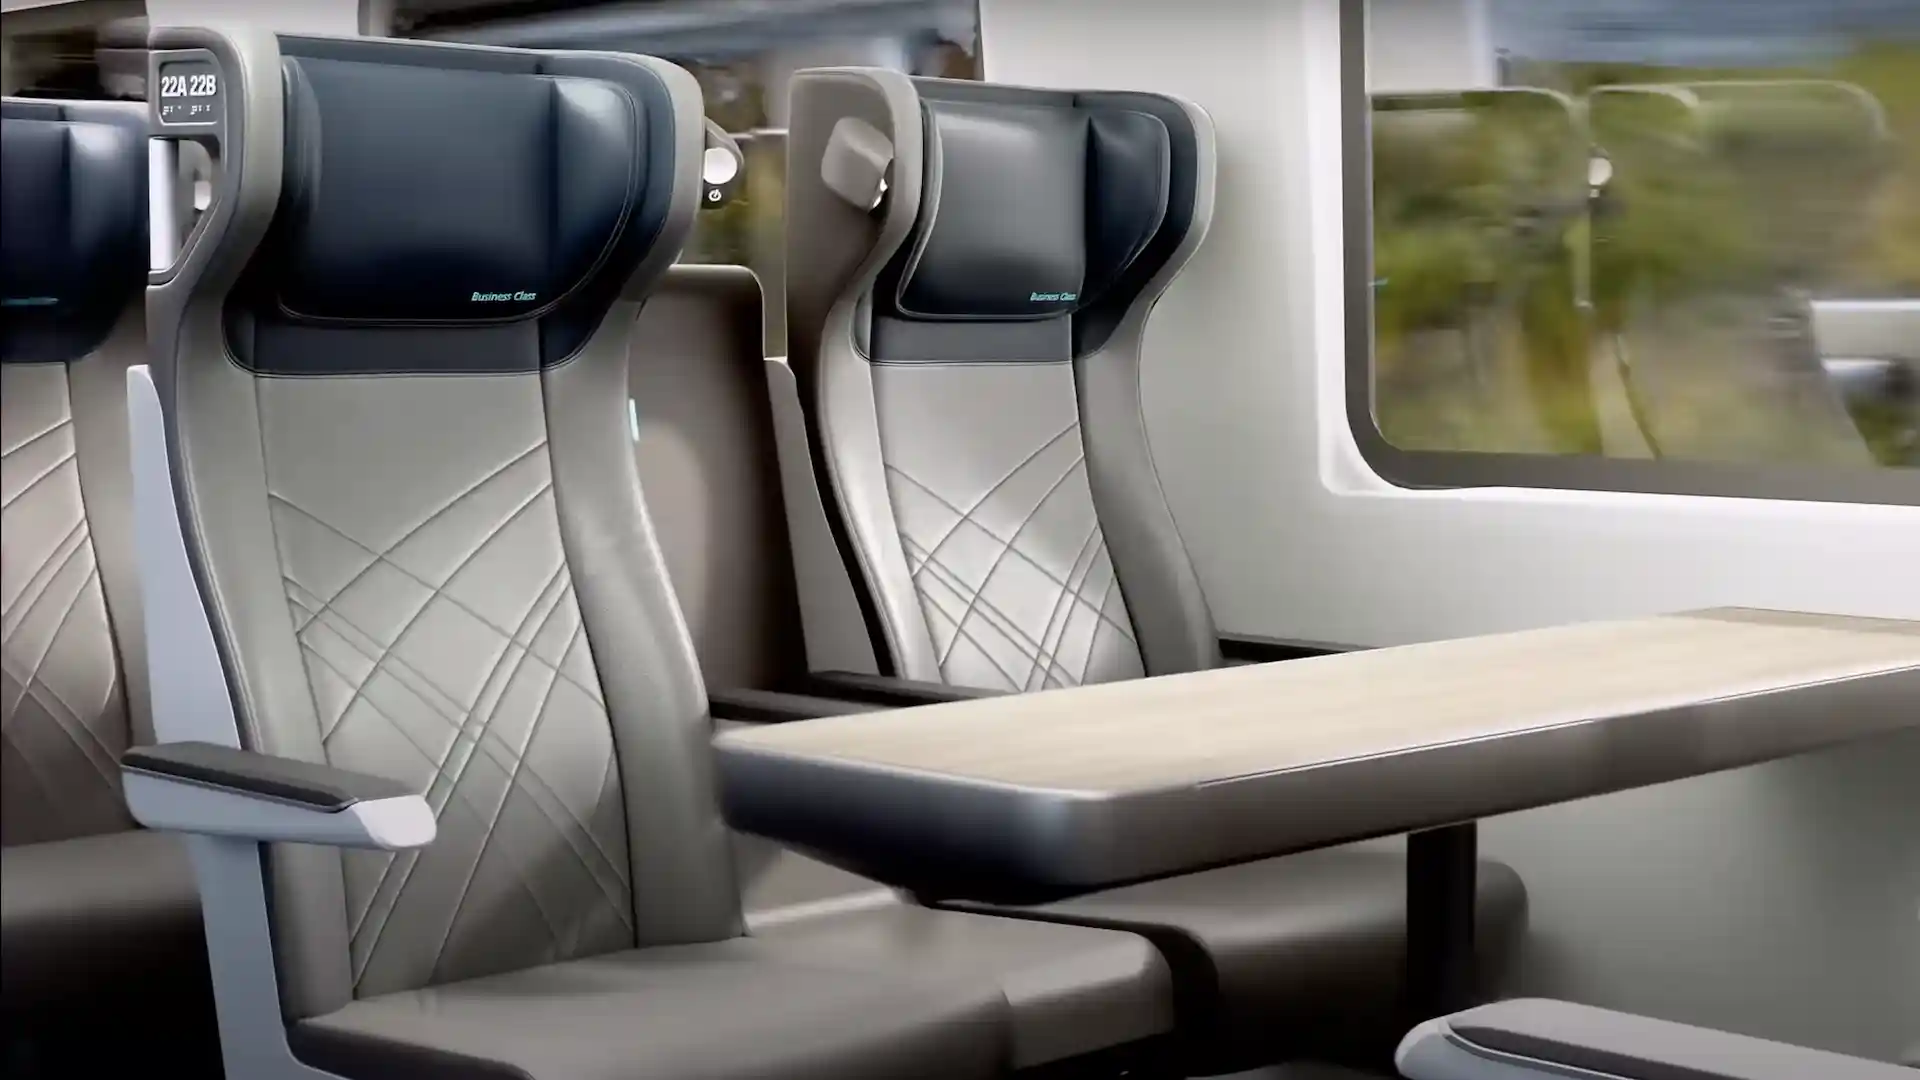 This is how modern Amtrak Airo trains look in pictures